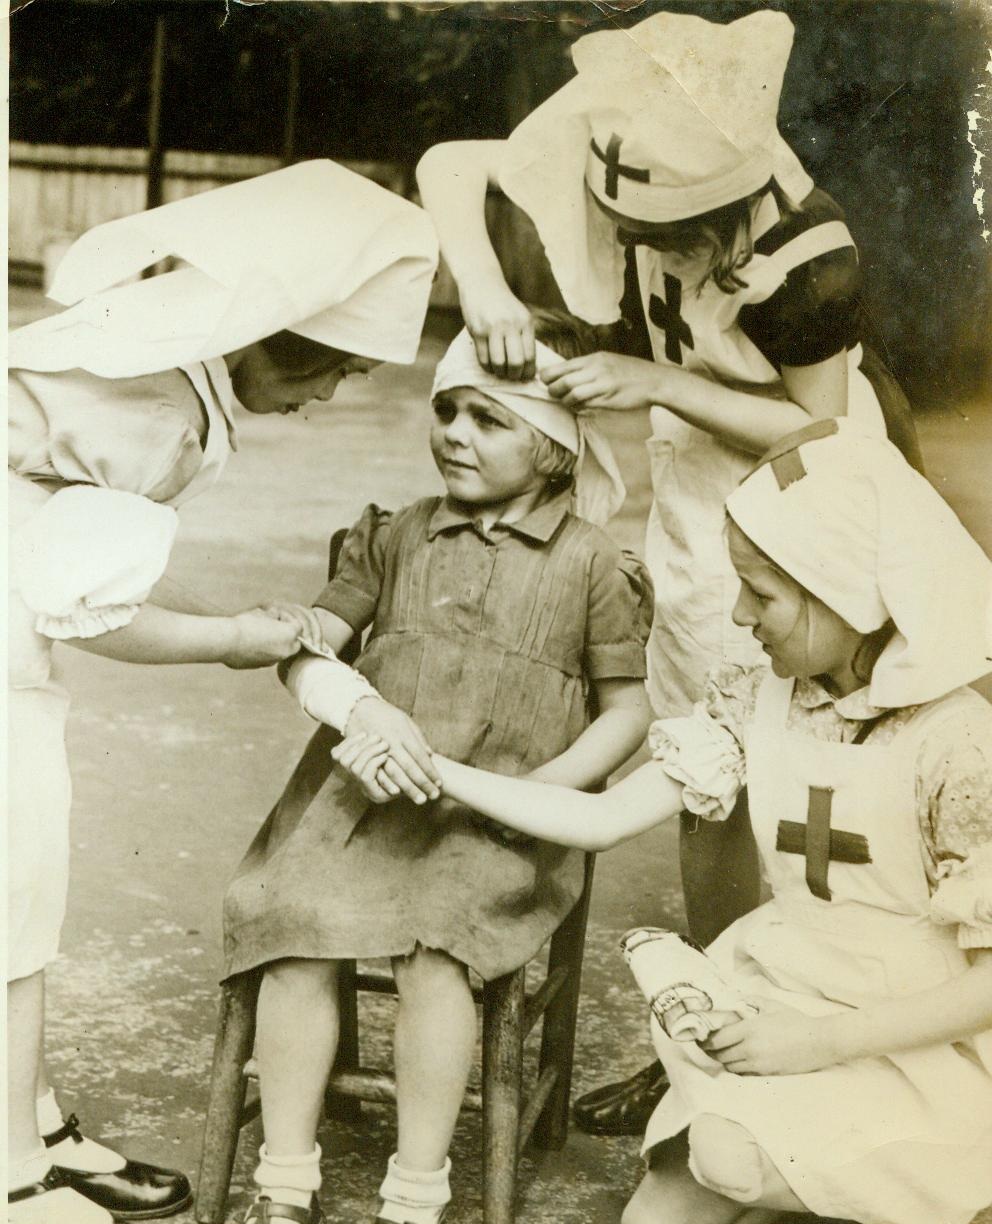 Youthful pill-pushers, 6/19/1944. ENGLAND – Dolls and building blocks have no lure for the young children at school in Beddington, Surrey. The study of first aid occupies all their time, and the youngsters are given instruction in the rudimentary functions. Here, three earnest little nurses attend a “patient”. Left to right: Ann Moon, 6; Patient Janet North, 5; Julia Walls, 7’ and Sheila Webb, 6. CREDIT (ACME) 6/19/44;